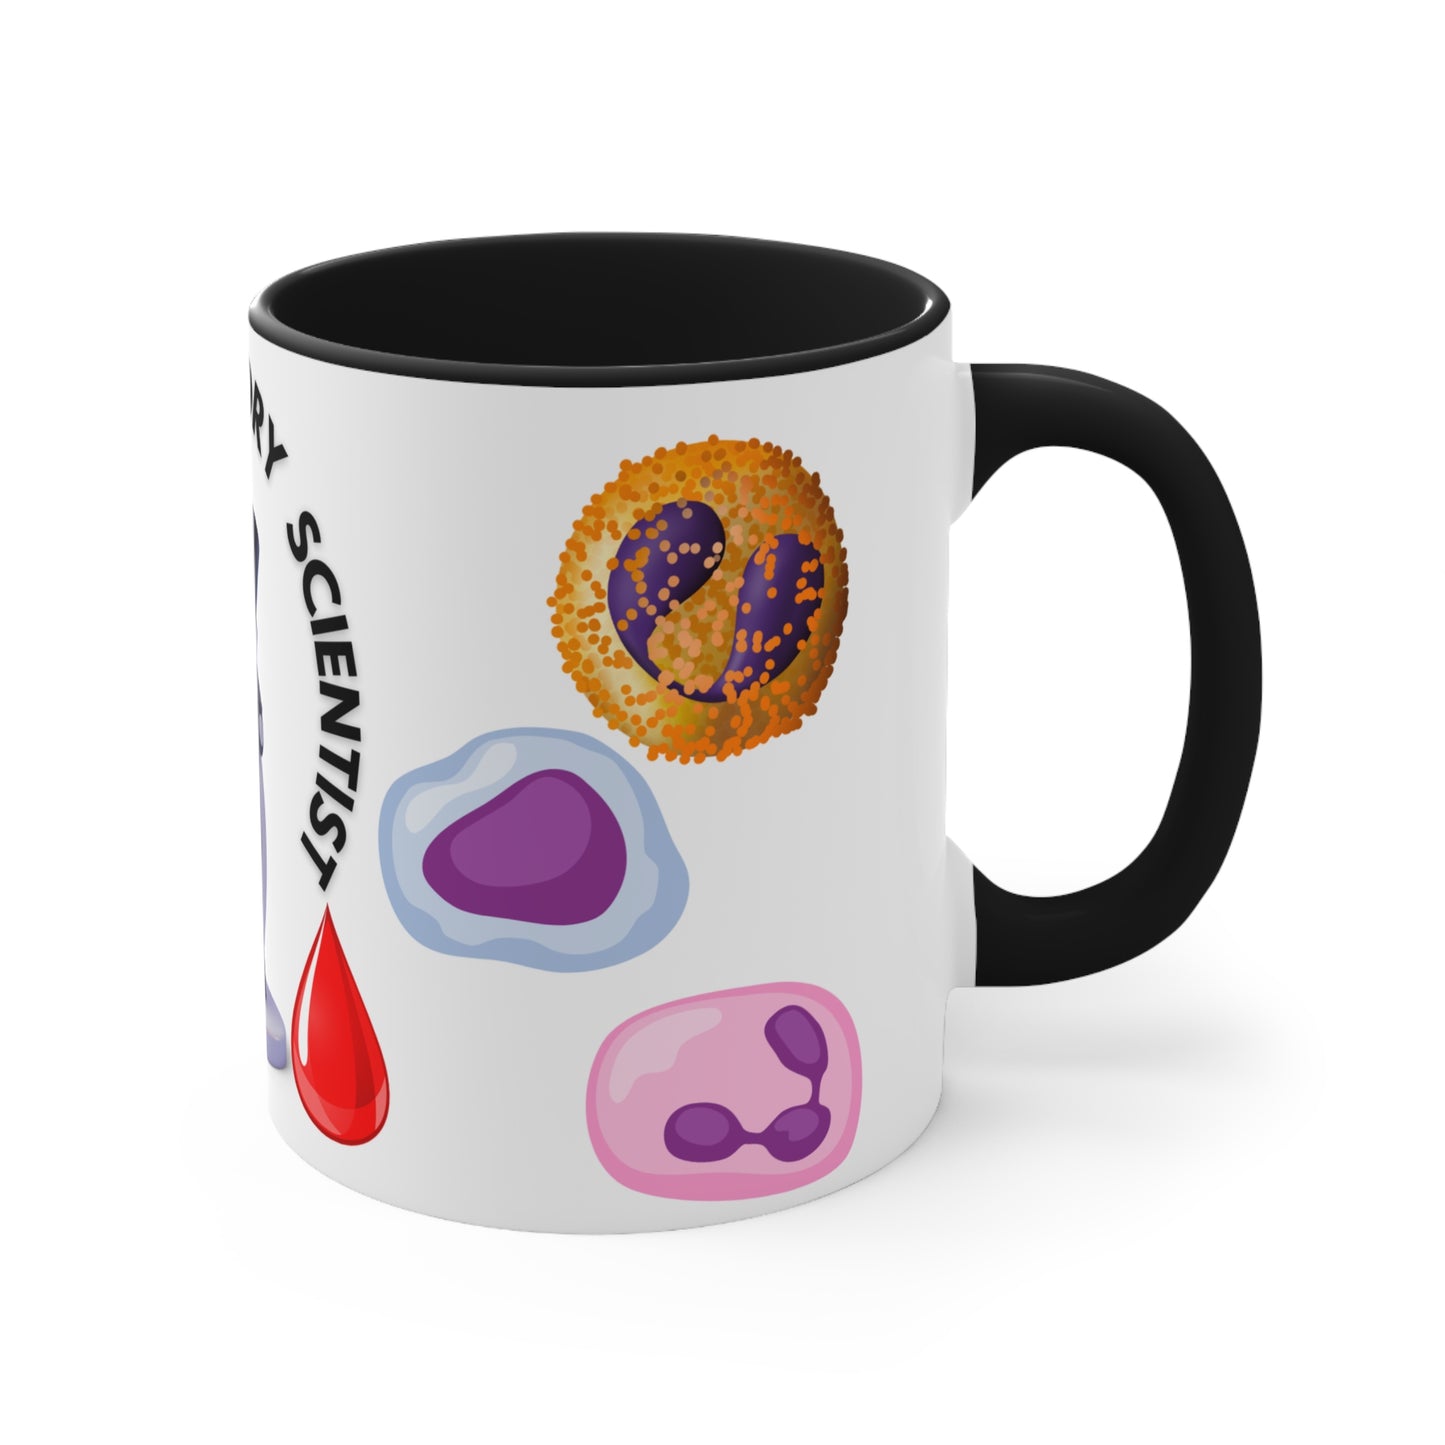 MEDICAL LABORATORY SCIENTIST MUG - Available with red or black accents -MUGSCITY - Free Shipping